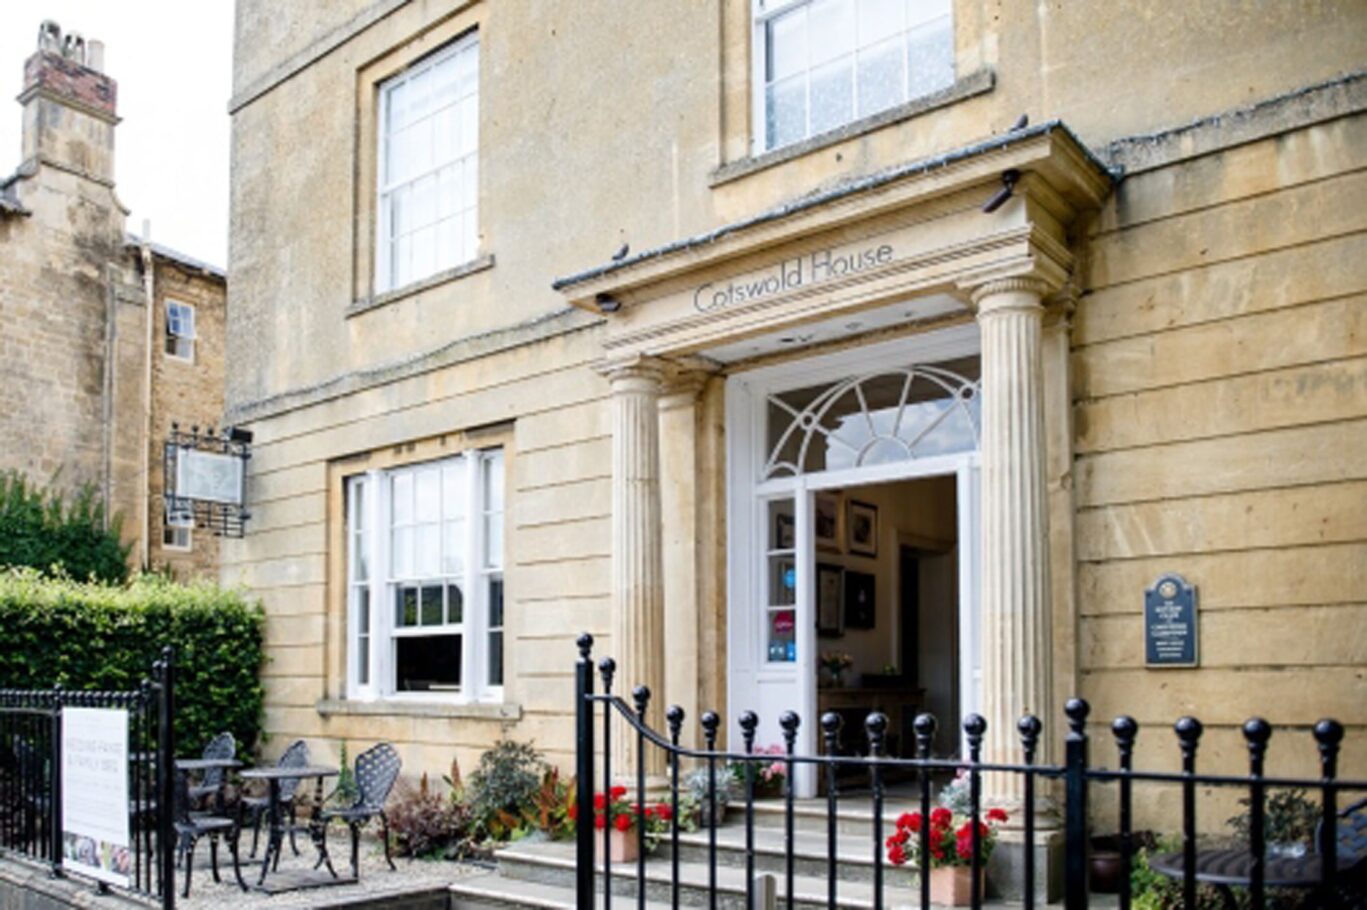 Cotswold House Hotel Front Entrance 3 Resize 1367x910 